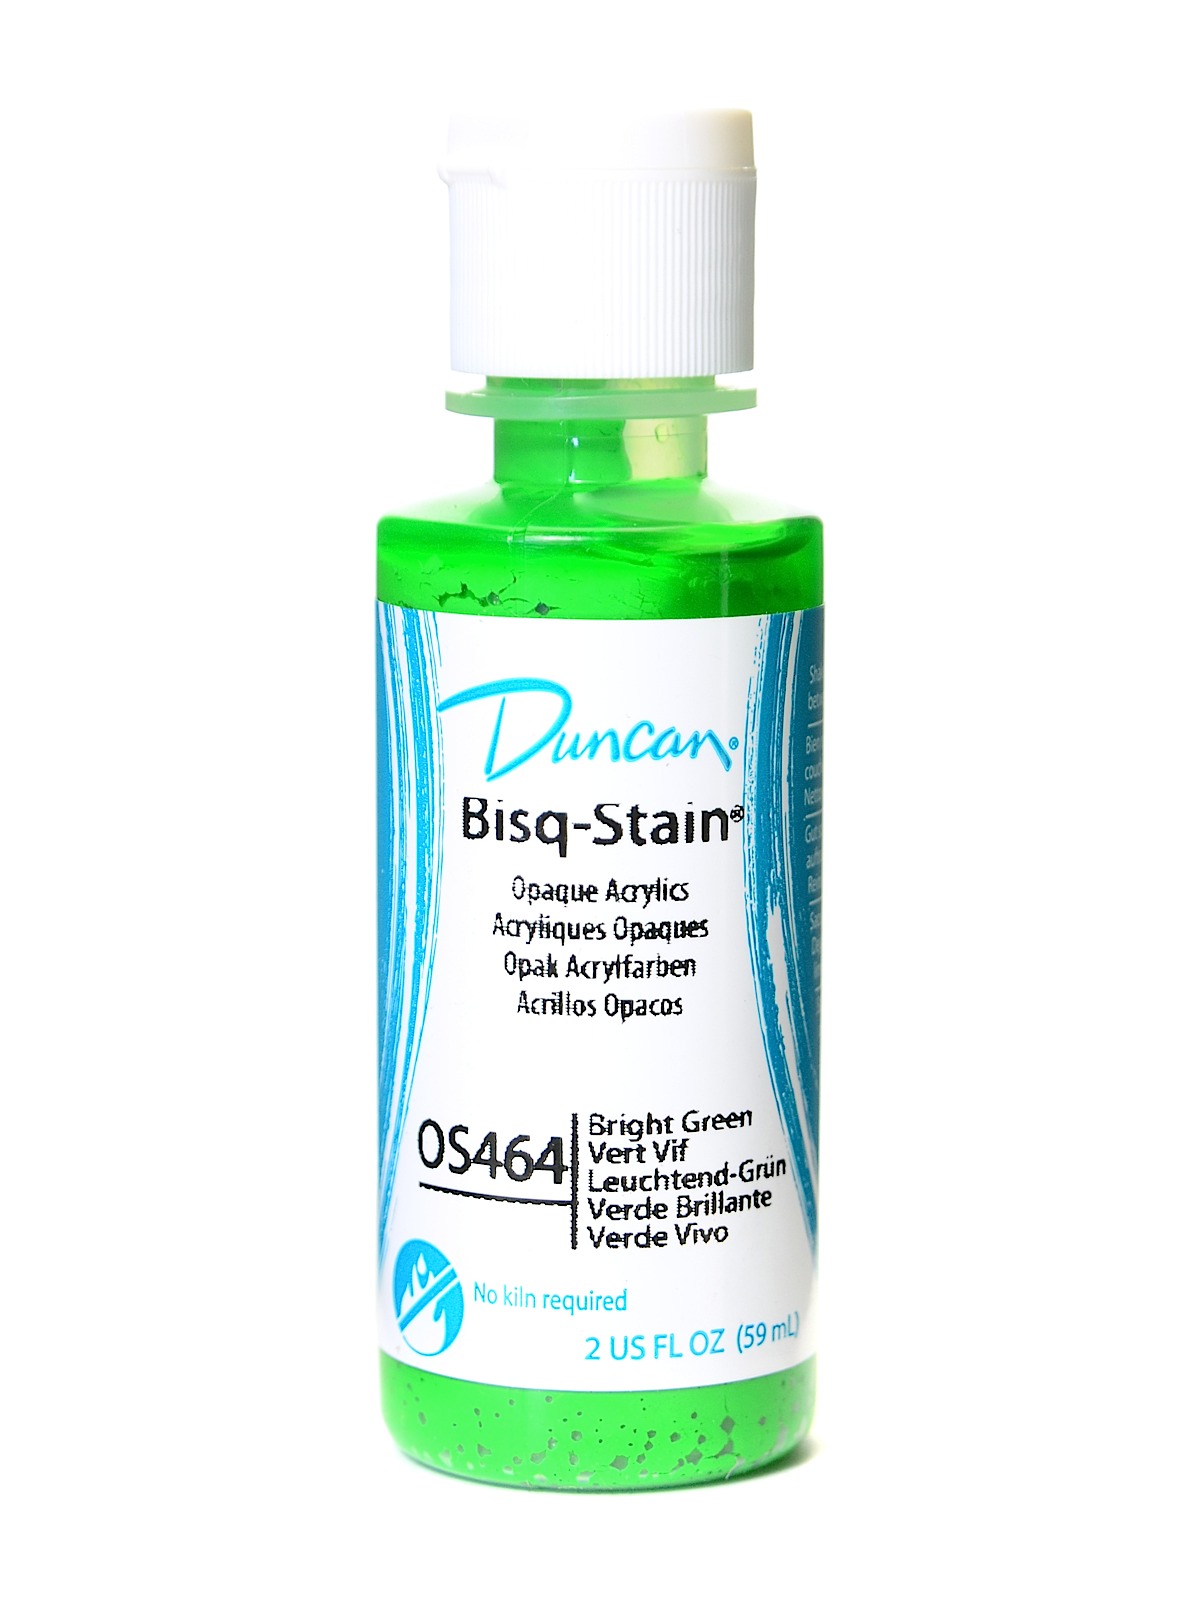 Bisq-stain Opaques Bright Green 2 Oz.